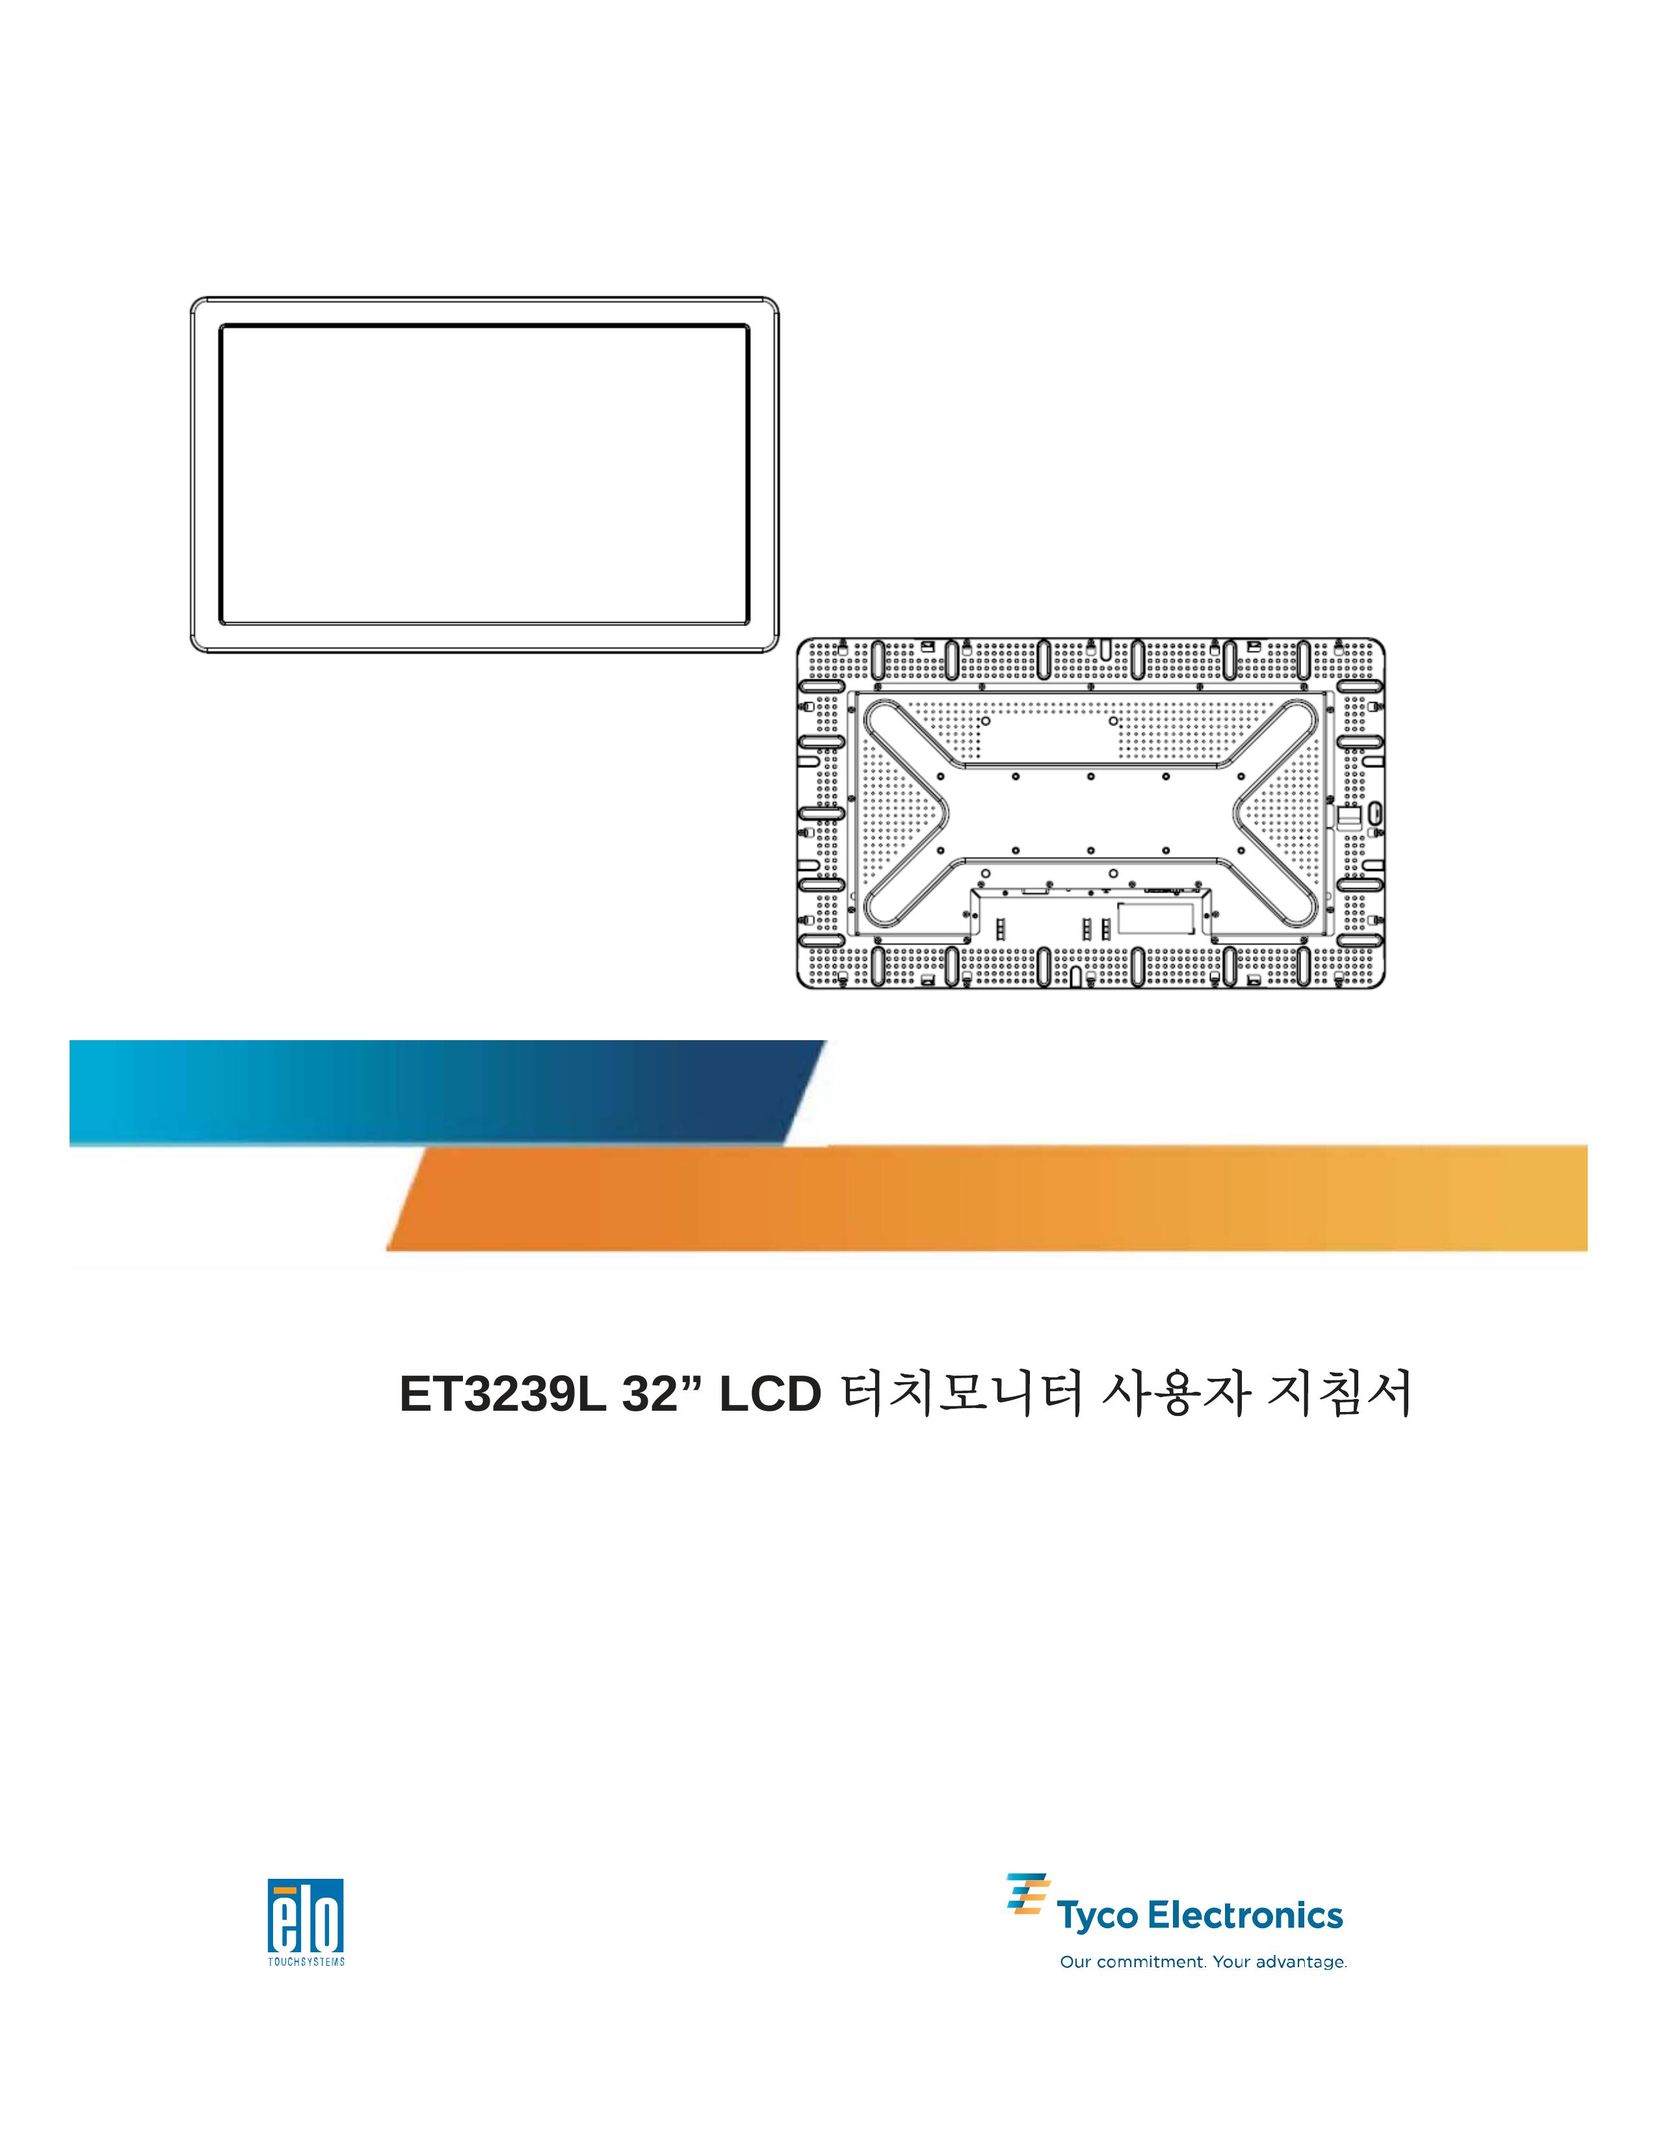 Elo TouchSystems ET3239L Flat Panel Television User Manual